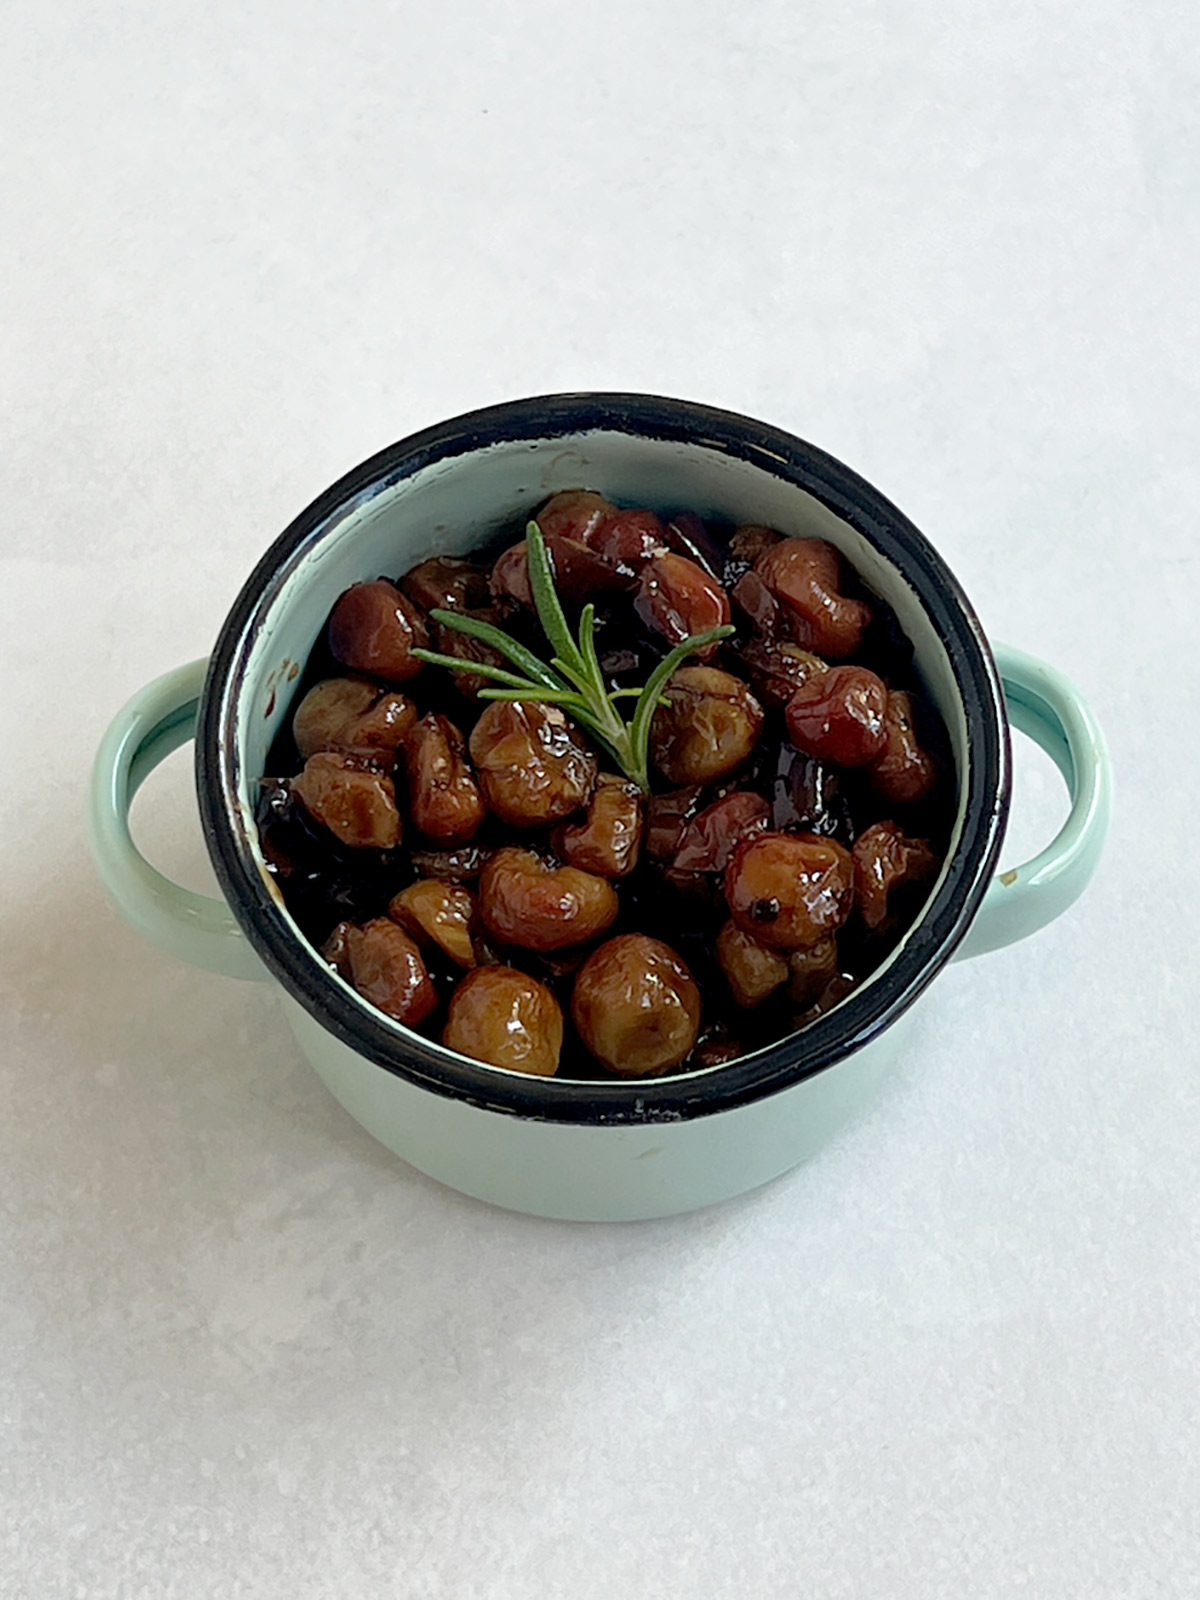 Roasted grapes in a turquoise serving bowl with rosemary on top.